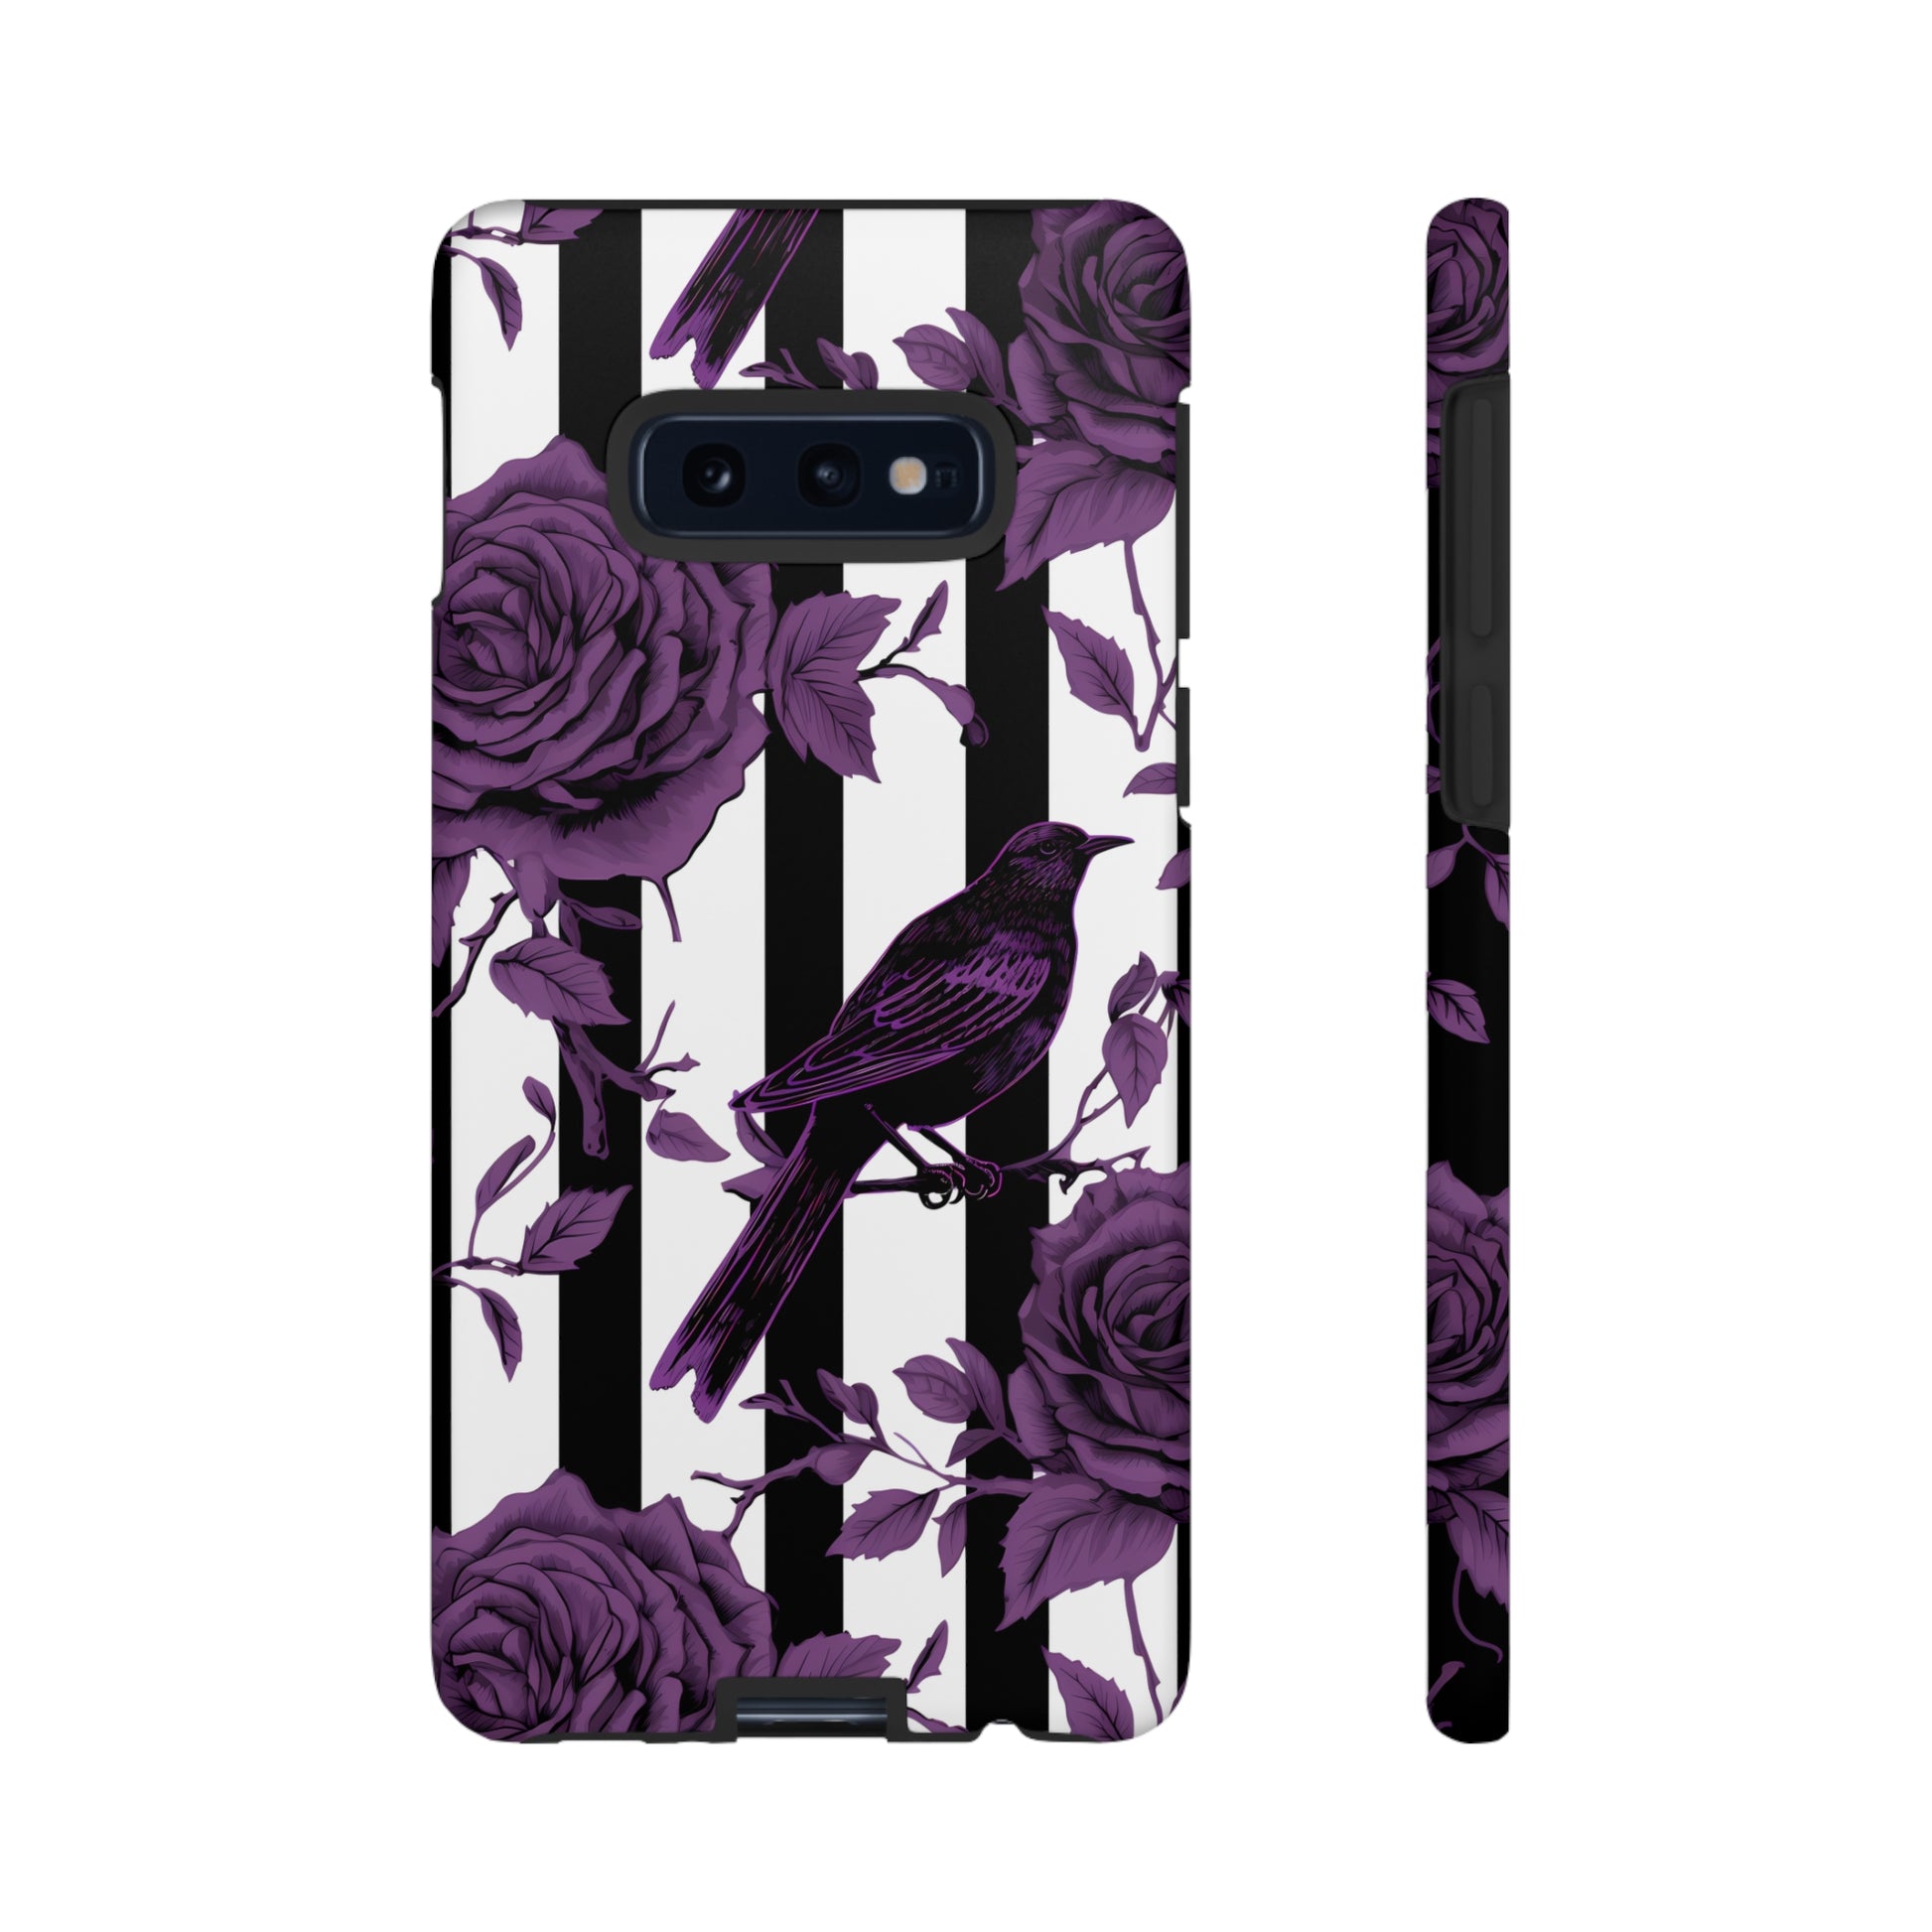 Striped Crows and Roses Tough Cases for iPhone Samsung Google PhonesPhone CaseVTZdesignsSamsung Galaxy S10EMatteAccessoriescrowsGlossy